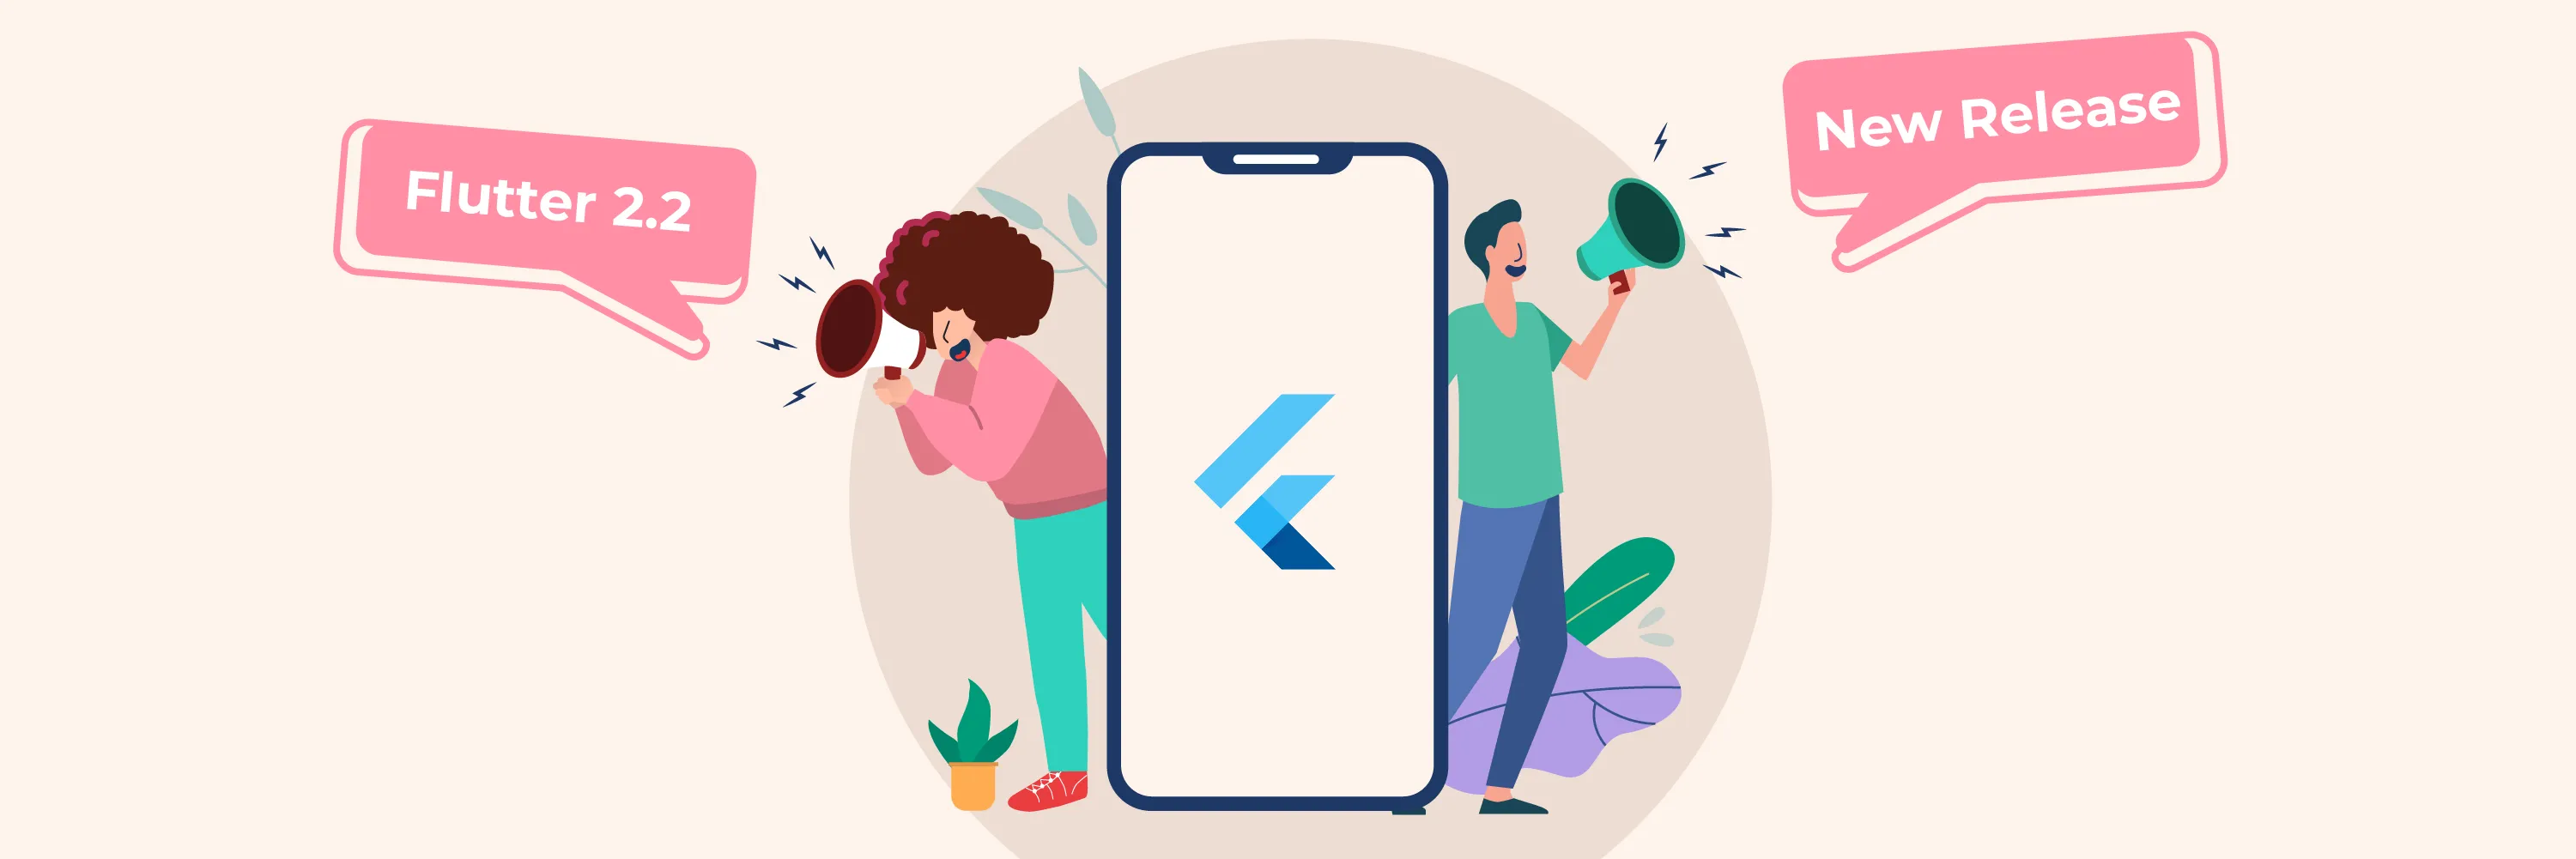 The Flutter 2.2 - What's New and What's Better?